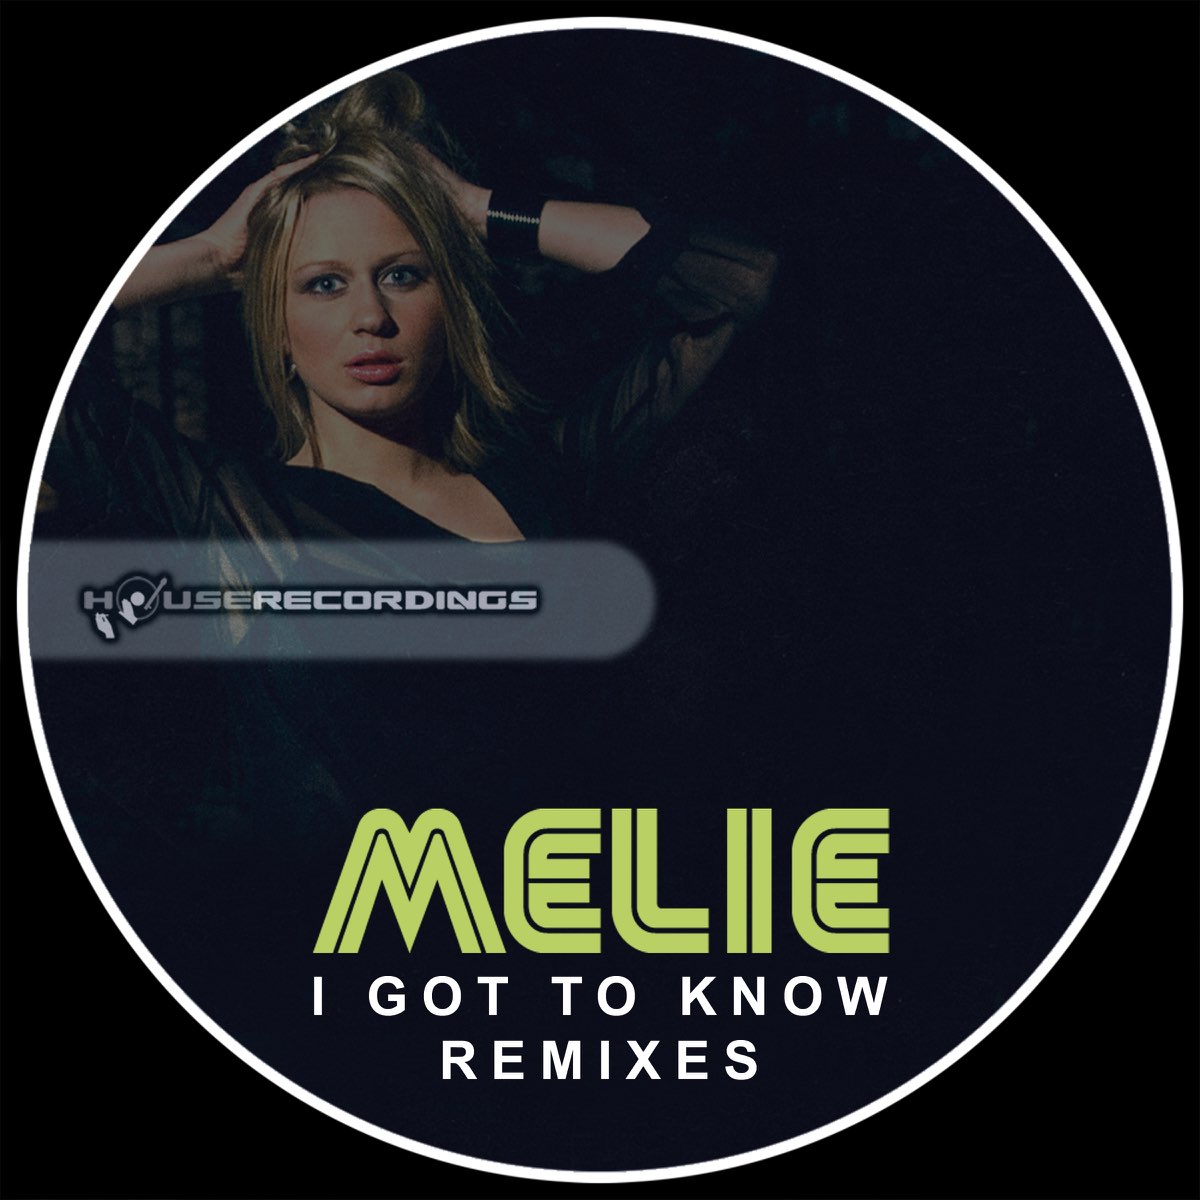 She knows remix